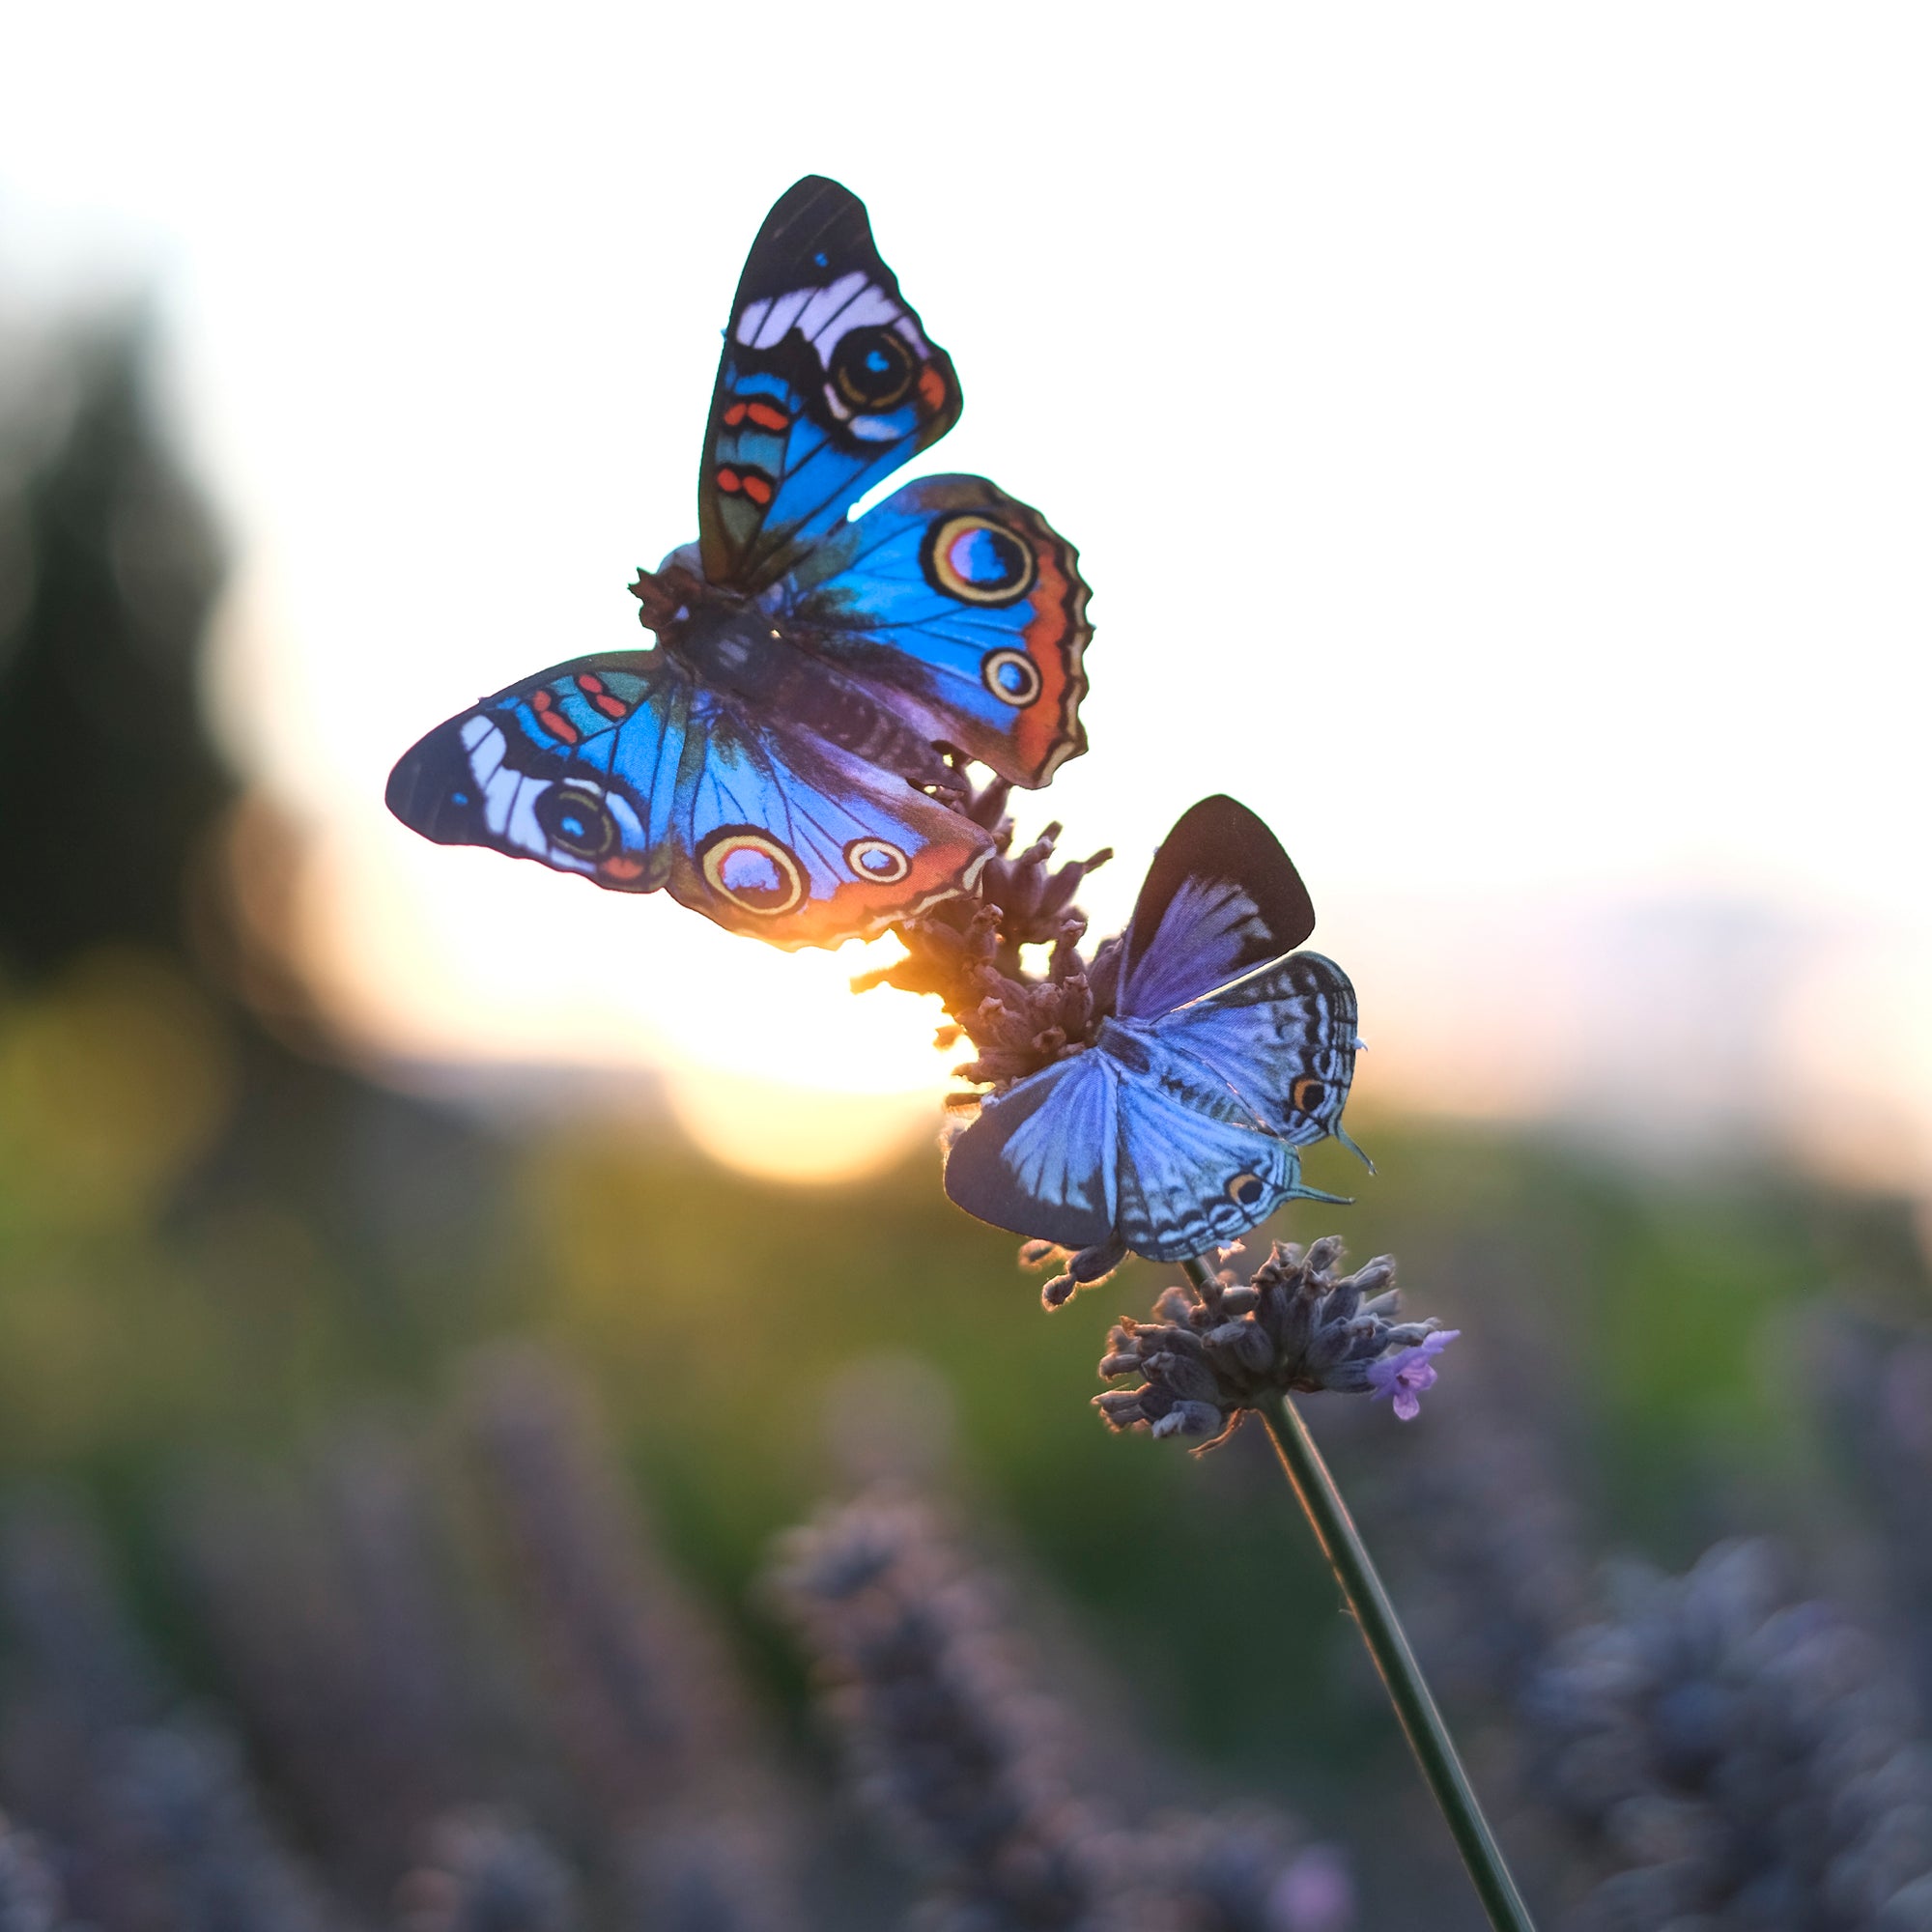 'Forget-me-not' Butterfly